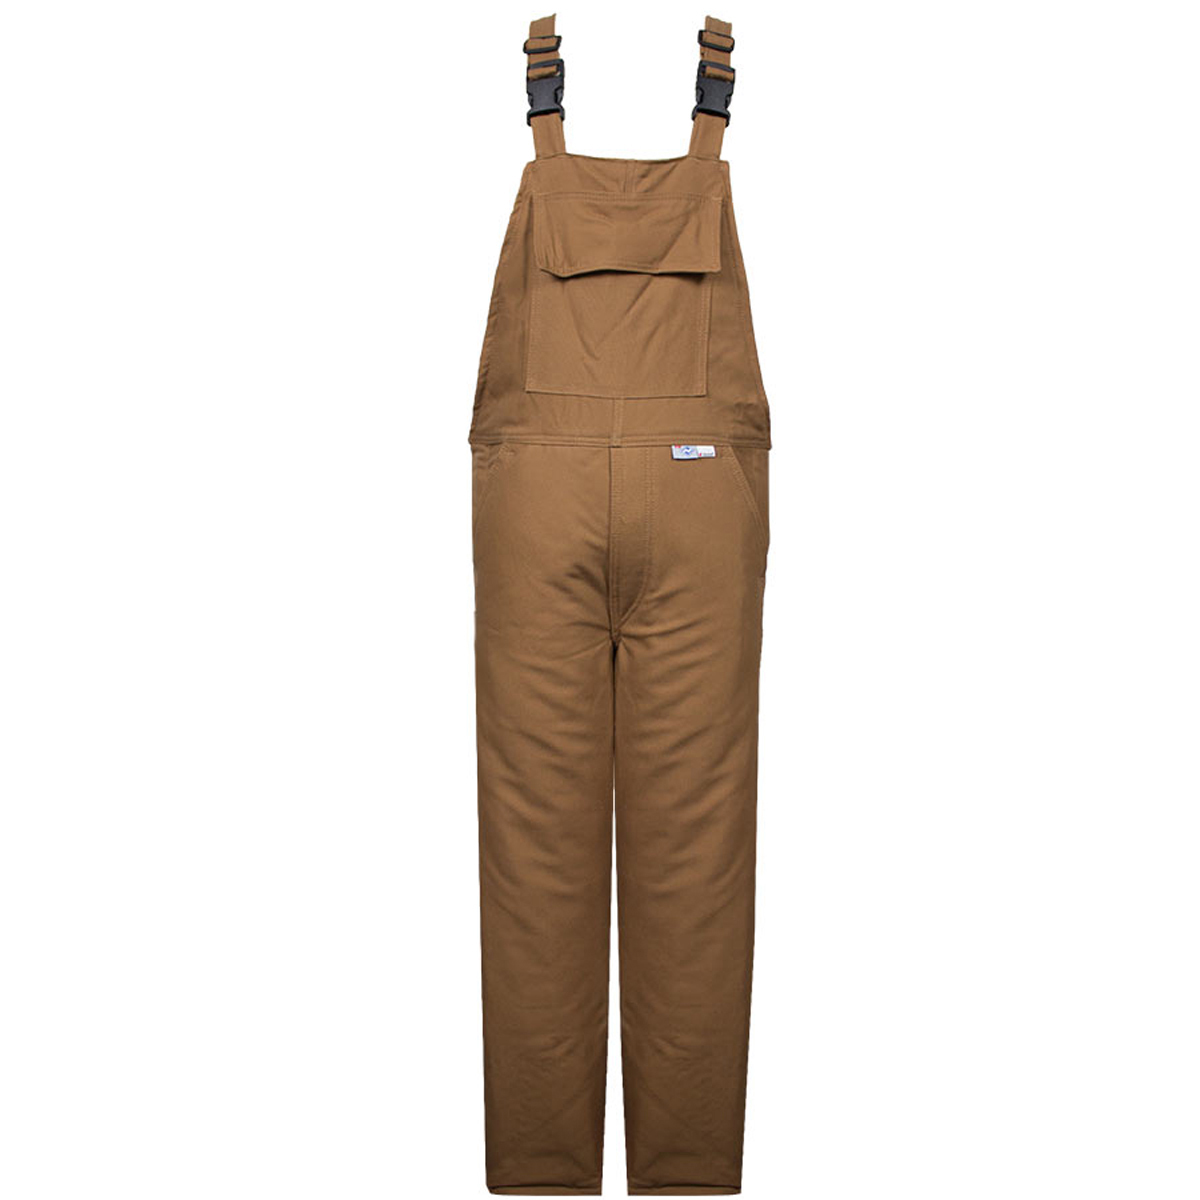 National Safety Apparel 2X Regular Brown Westex UltraSoft® Duck/DWR Flame Resistant Bib Overall FR Quilted Lining With Zipper Fr